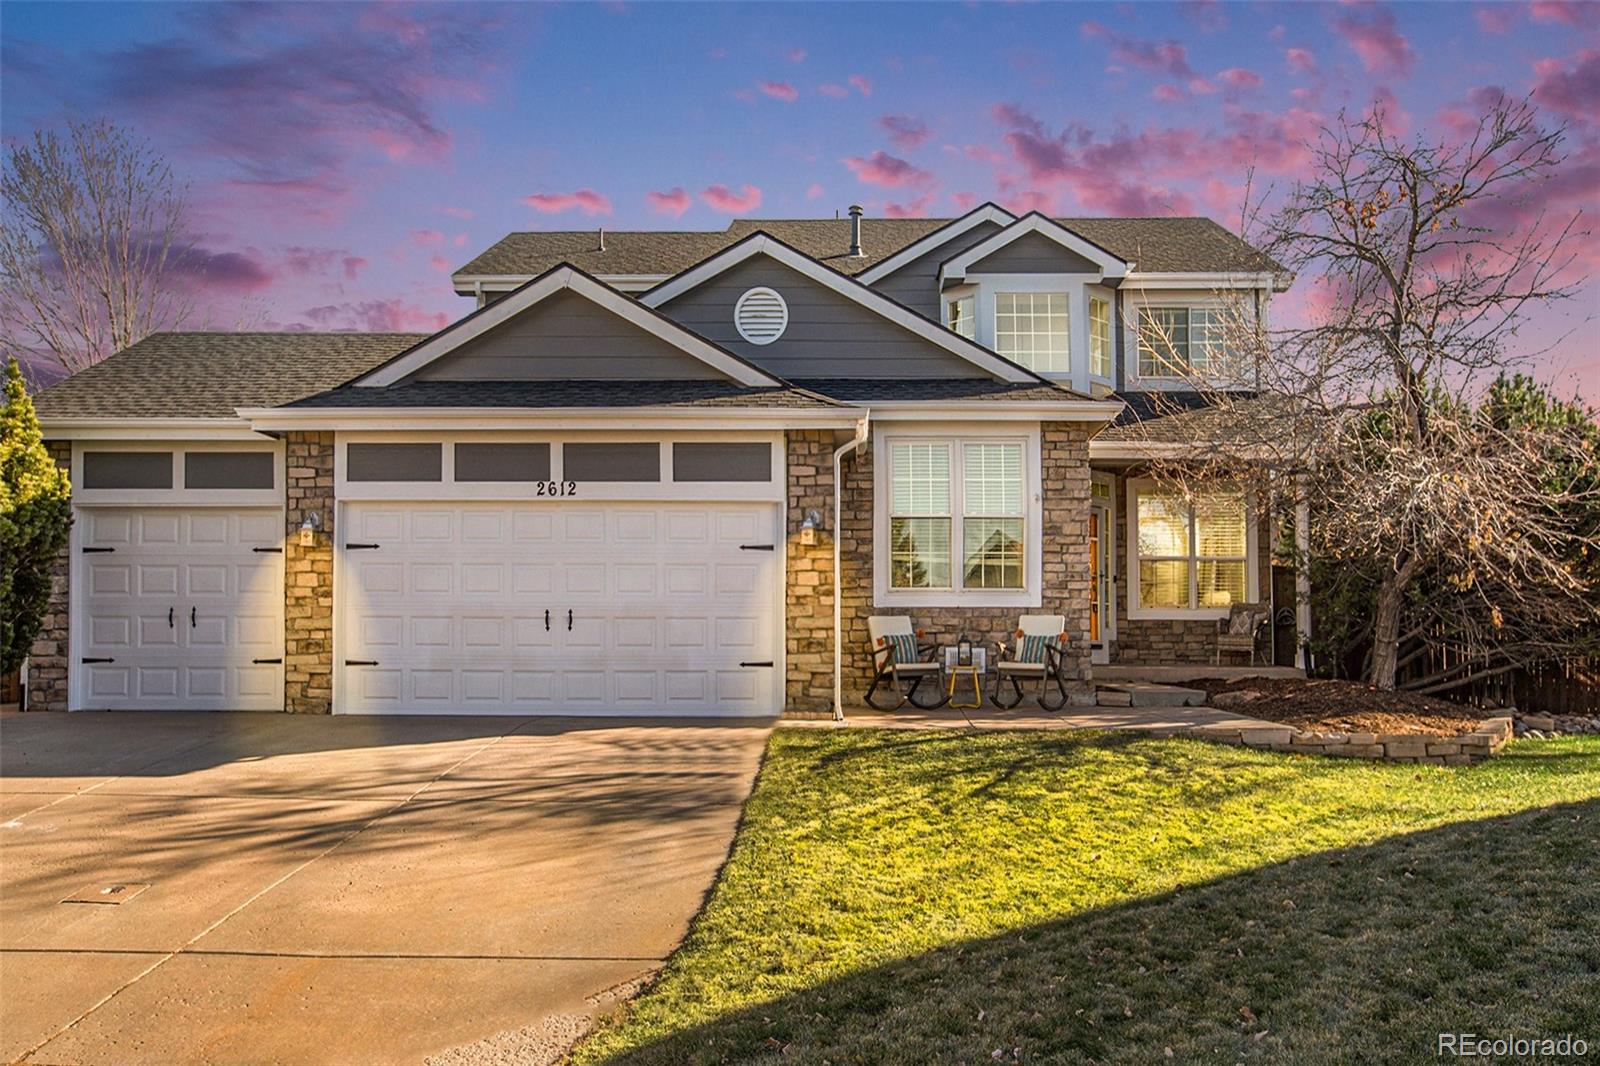 2612  Baneberry Court, highlands ranch MLS: 2297889 Beds: 4 Baths: 4 Price: $924,500